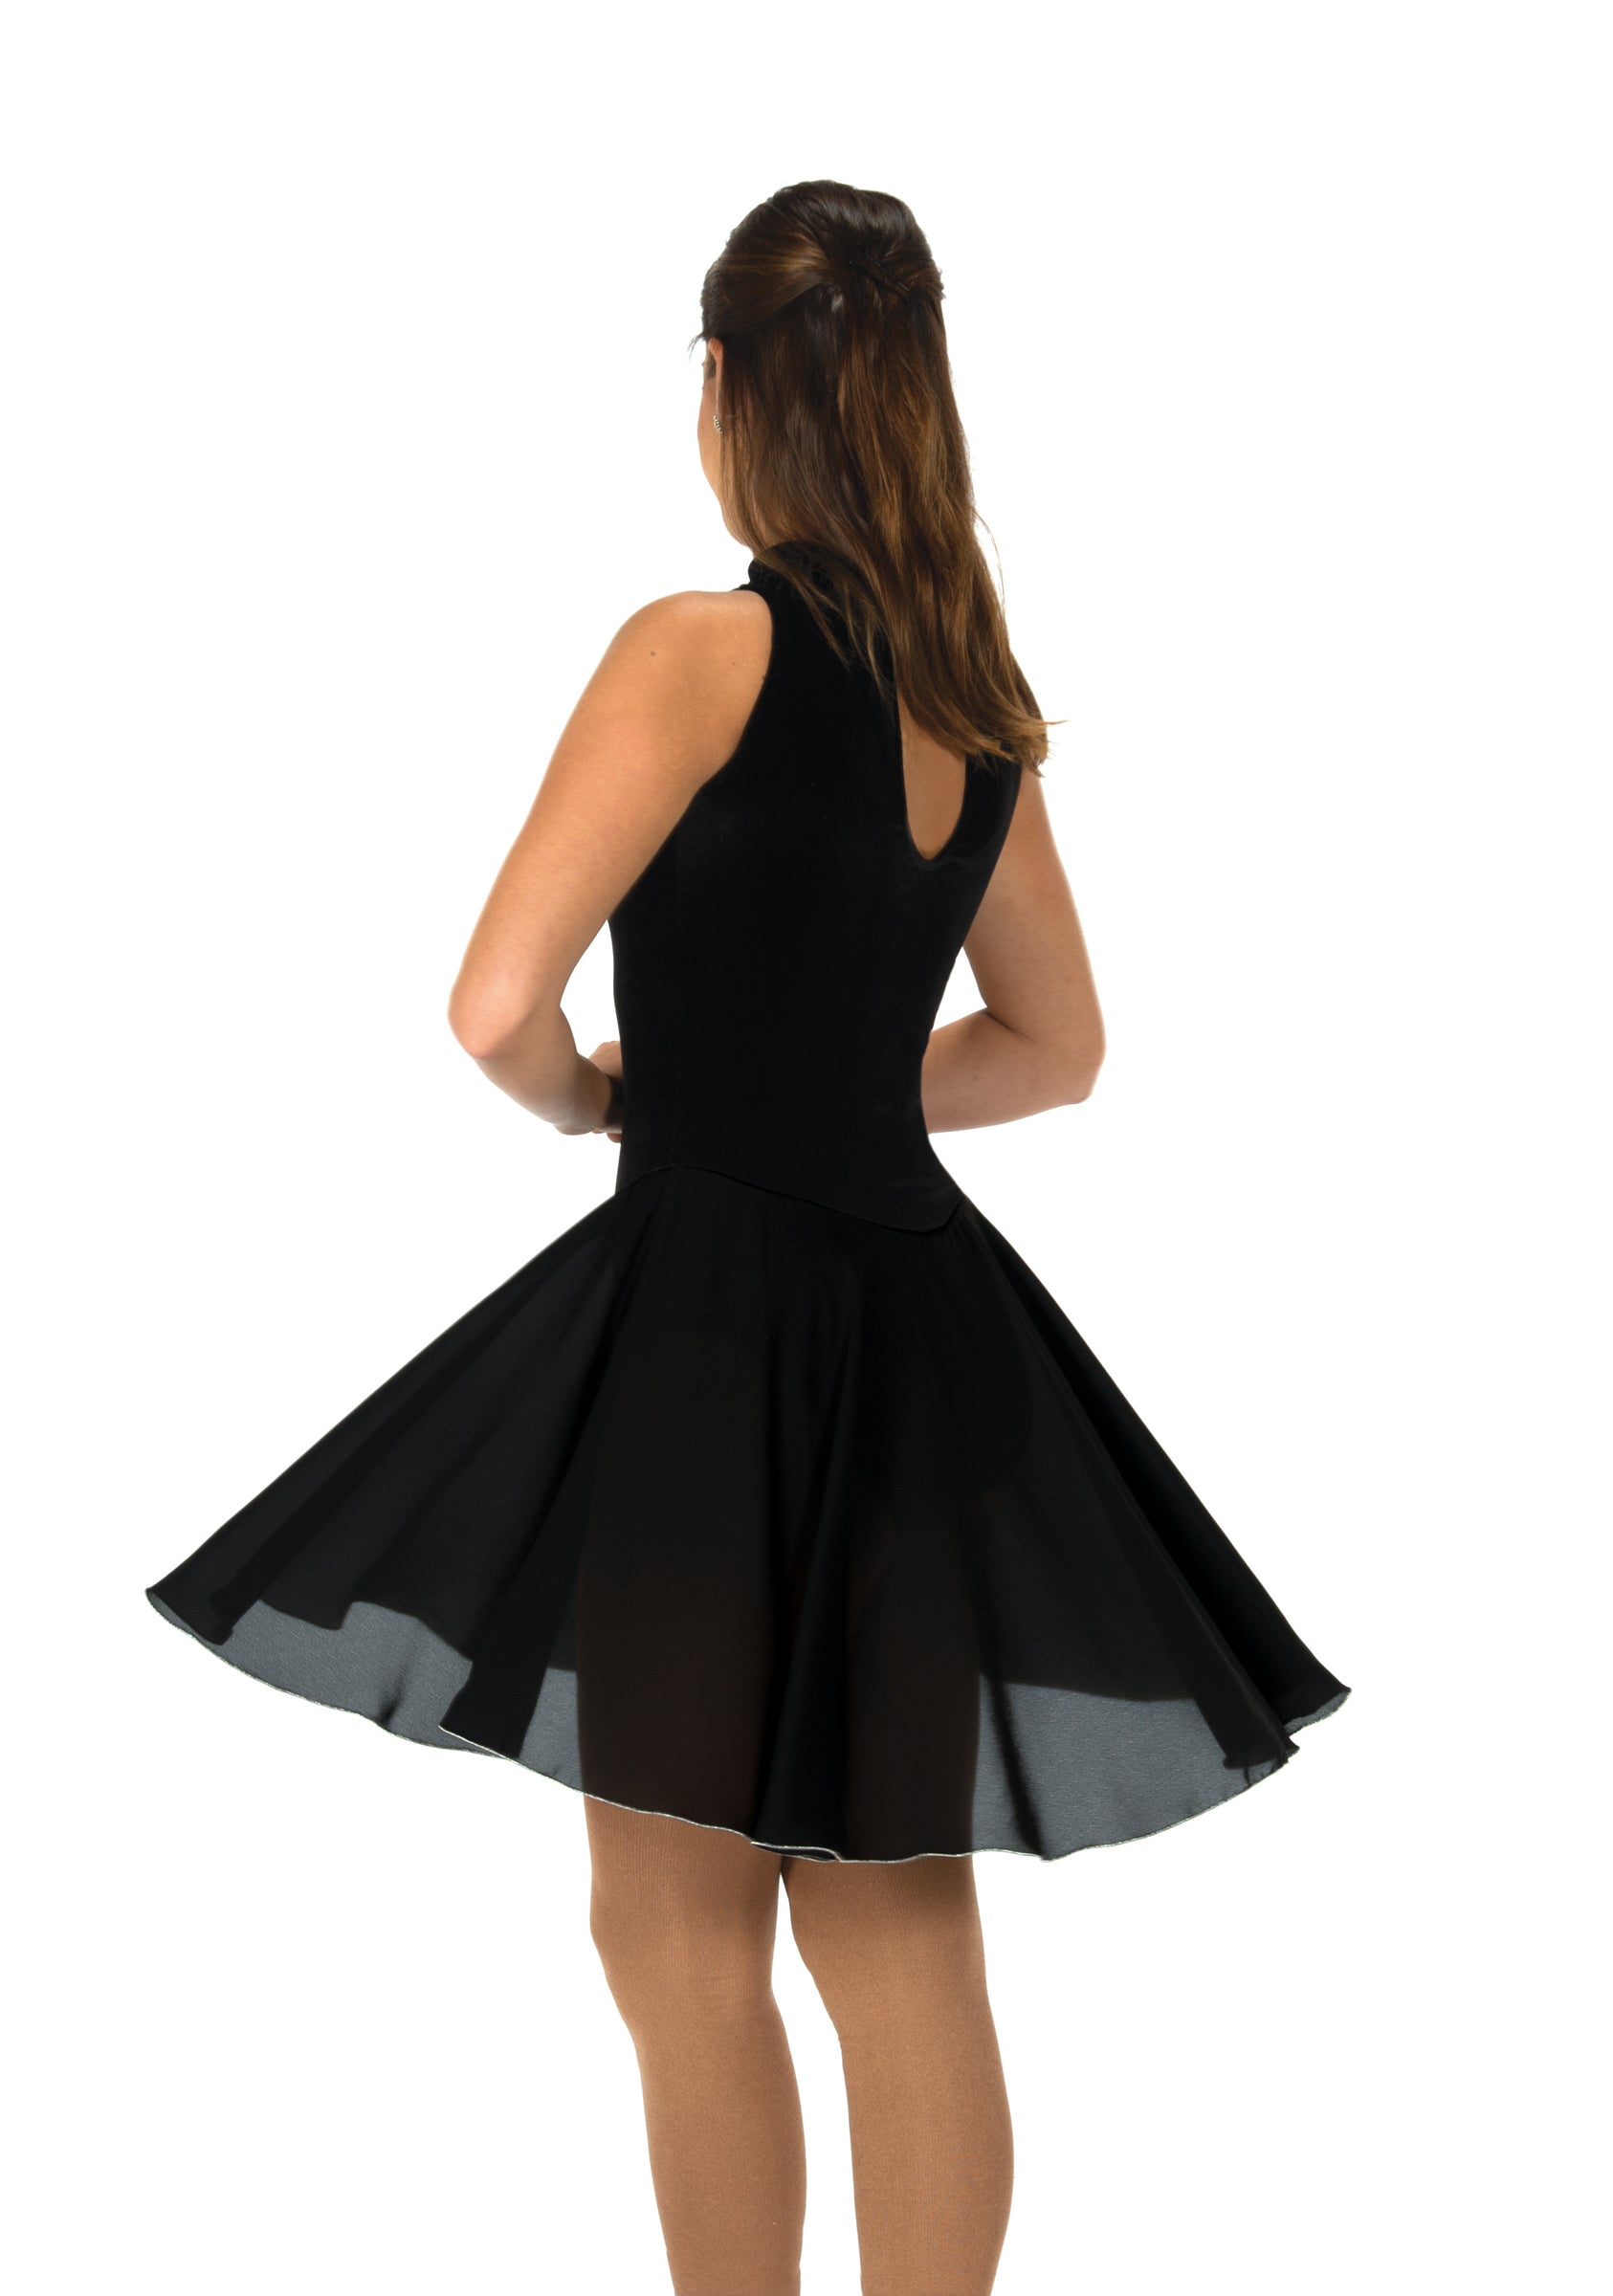 97 Crystal Dance Skating Dress in Black by Jerry's